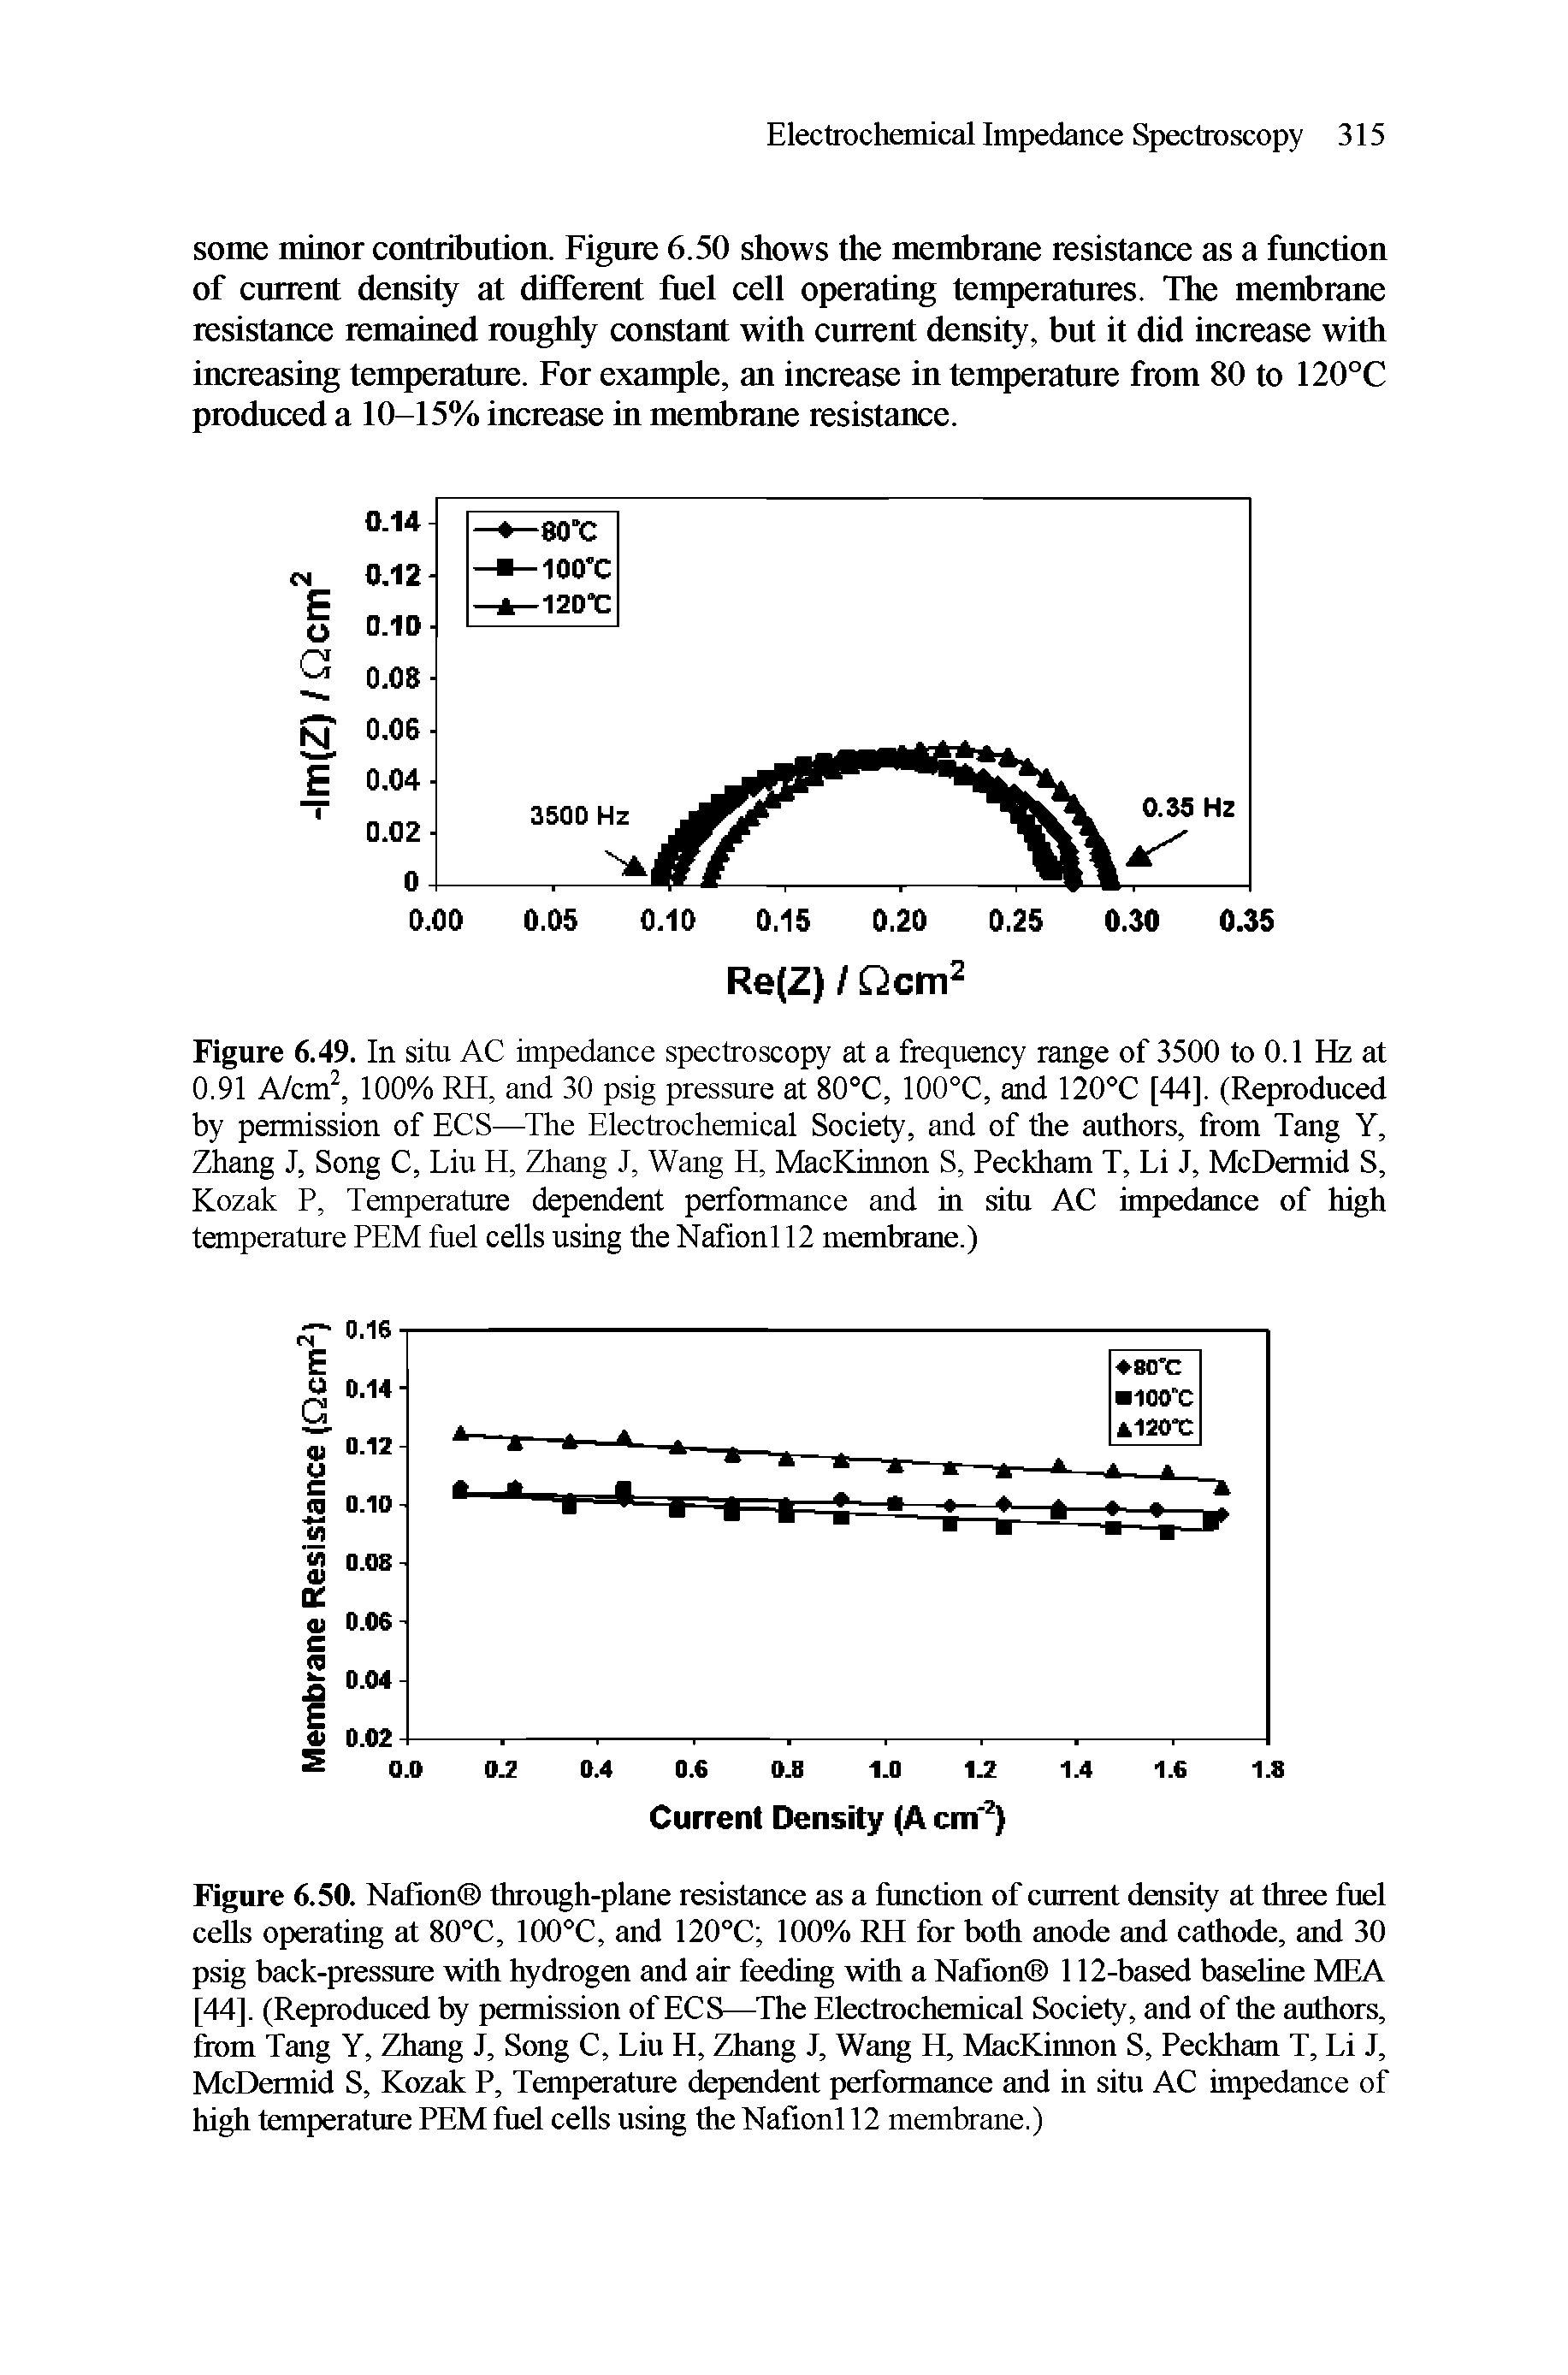 Figure 6.49. In situ AC impedance spectroscopy at a frequency range of 3500 to 0.1 Hz at 0.91 A/cm2, 100% RH, and 30 psig pressure at 80°C, 100°C, and 120°C [44]. (Reproduced by permission of ECS—The Electrochemical Society, and of the authors, from Tang Y, Zhang J, Song C, Liu H, Zhang J, Wang H, MacKinnon S, Peckham T, Li J, McDermid S, Kozak P, Temperature dependent performance and in situ AC impedance of high temperature PEM fuel cells using the Nafionl 12 membrane.)...